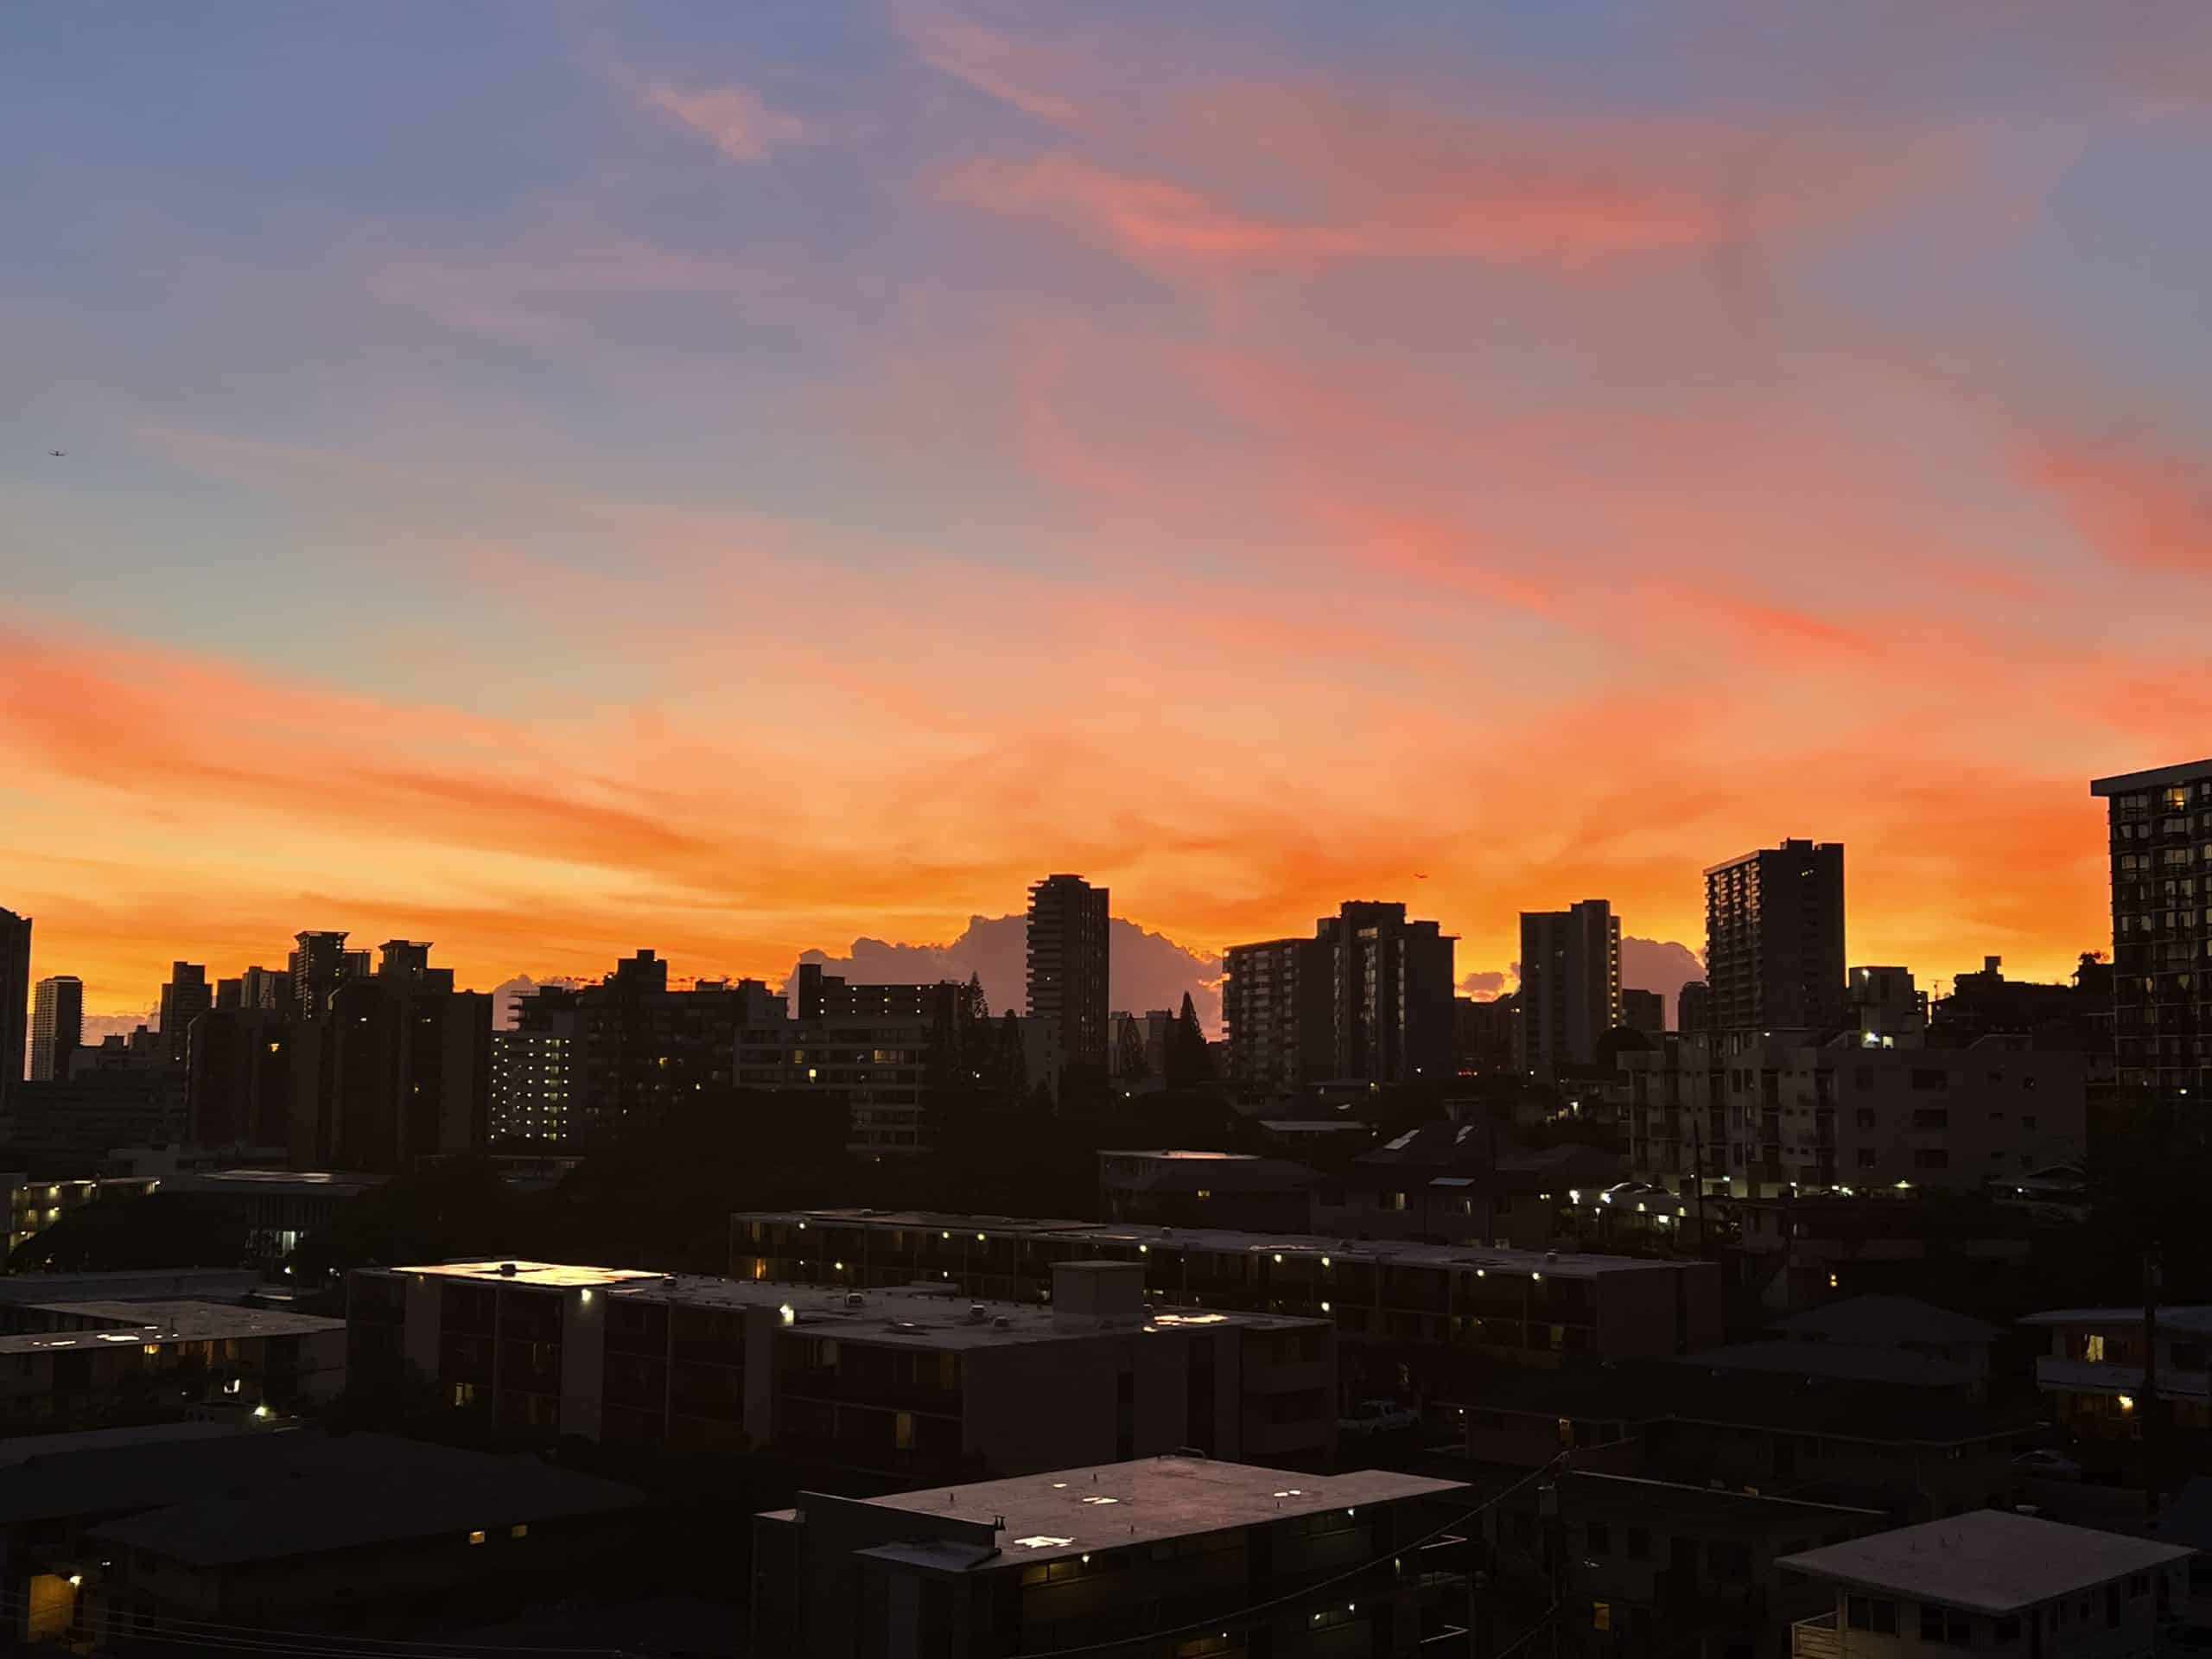 Best things to do in Honolulu Hawaii - Claire Tak - Sunset in Honolulu from my balcony